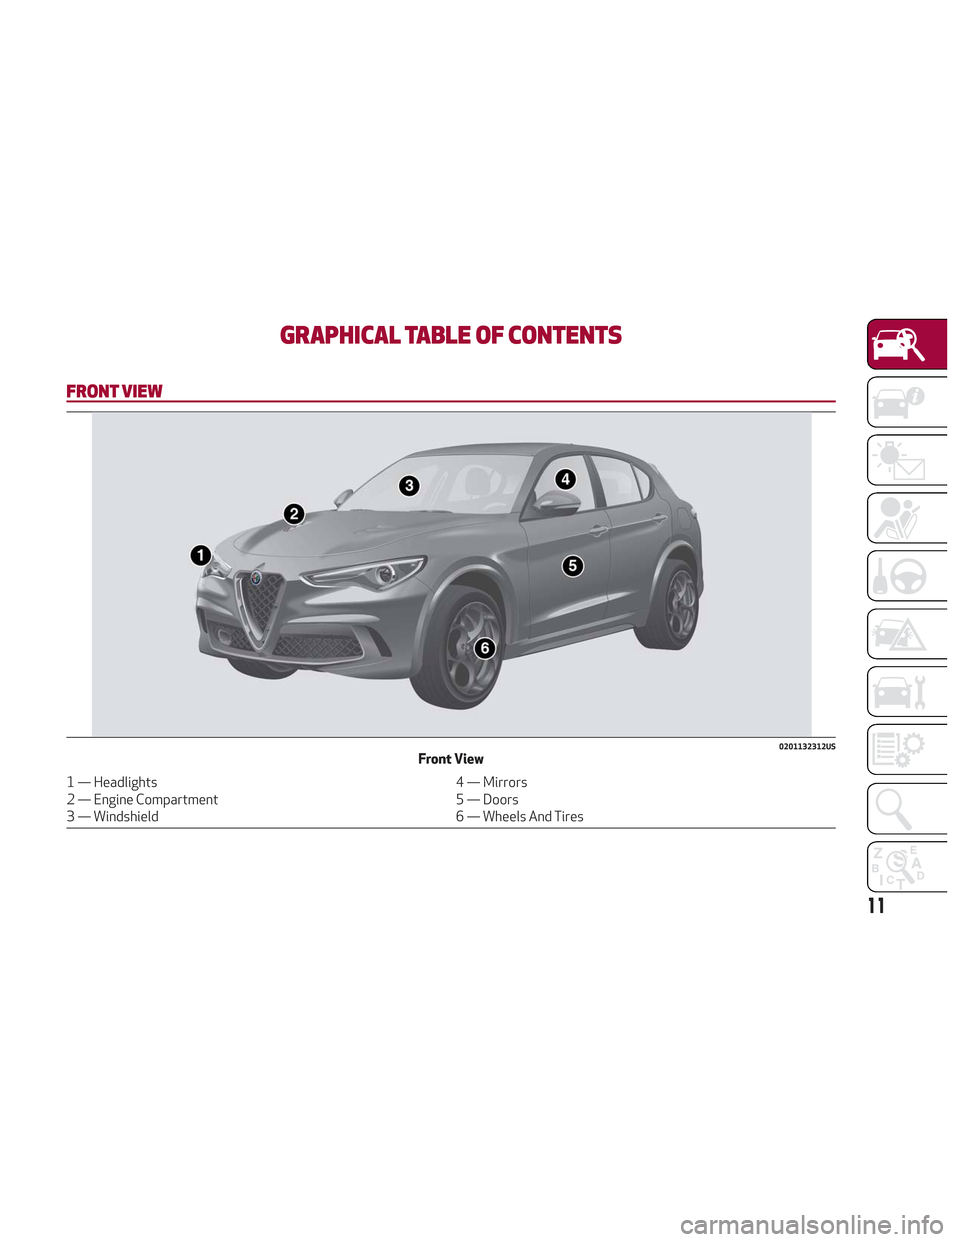 Alfa Romeo Stelvio 2018  Owners Manual GRAPHICAL TABLE OF CONTENTS
FRONT VIEW
0201132312USFront View
1 — Headlights4 — Mirrors
2 — Engine Compartment 5 — Doors
3 — Windshield 6 — Wheels And Tires
11 